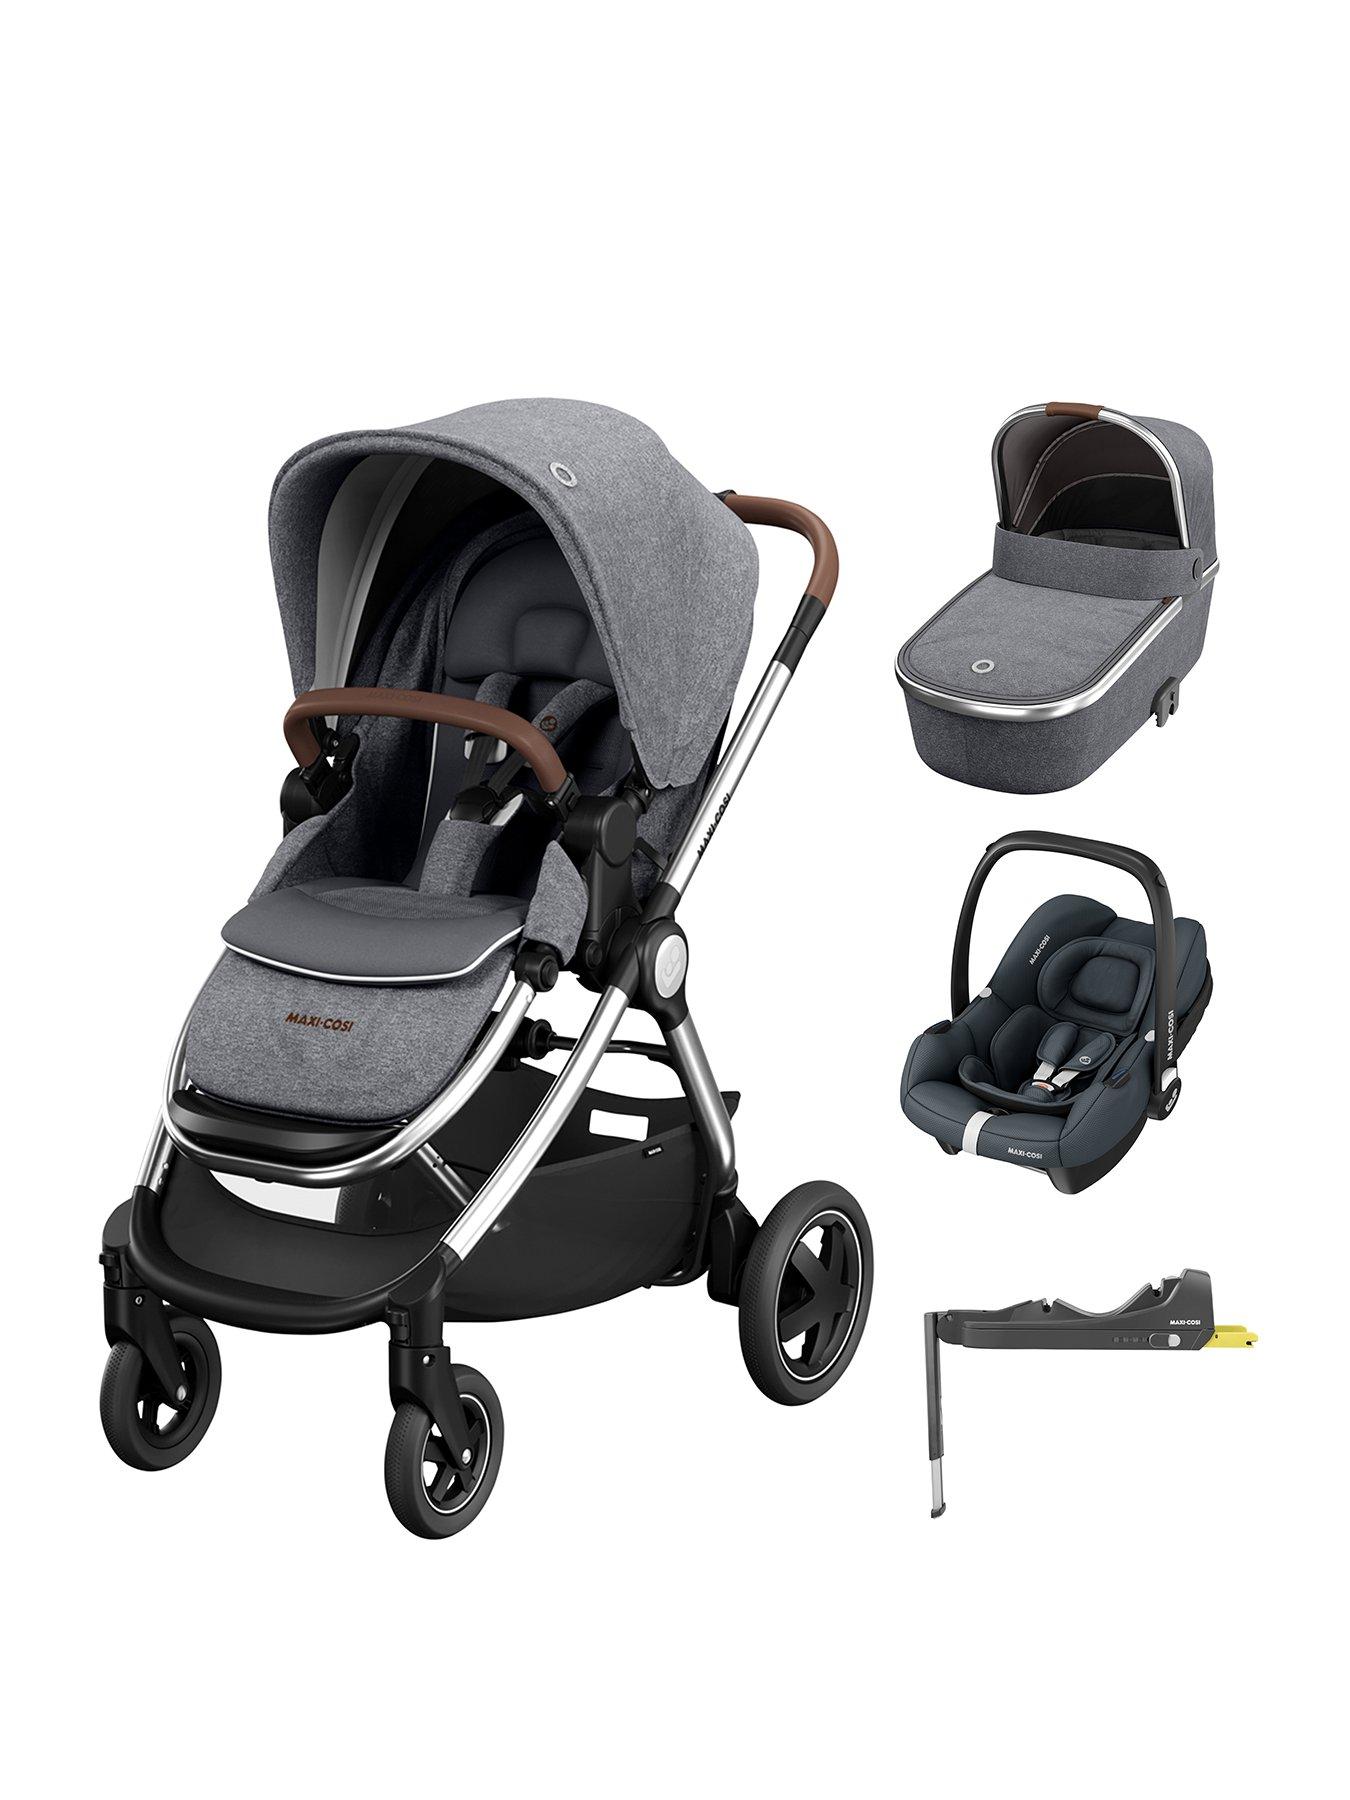 Travel Systems, Pushchairs, Child & baby